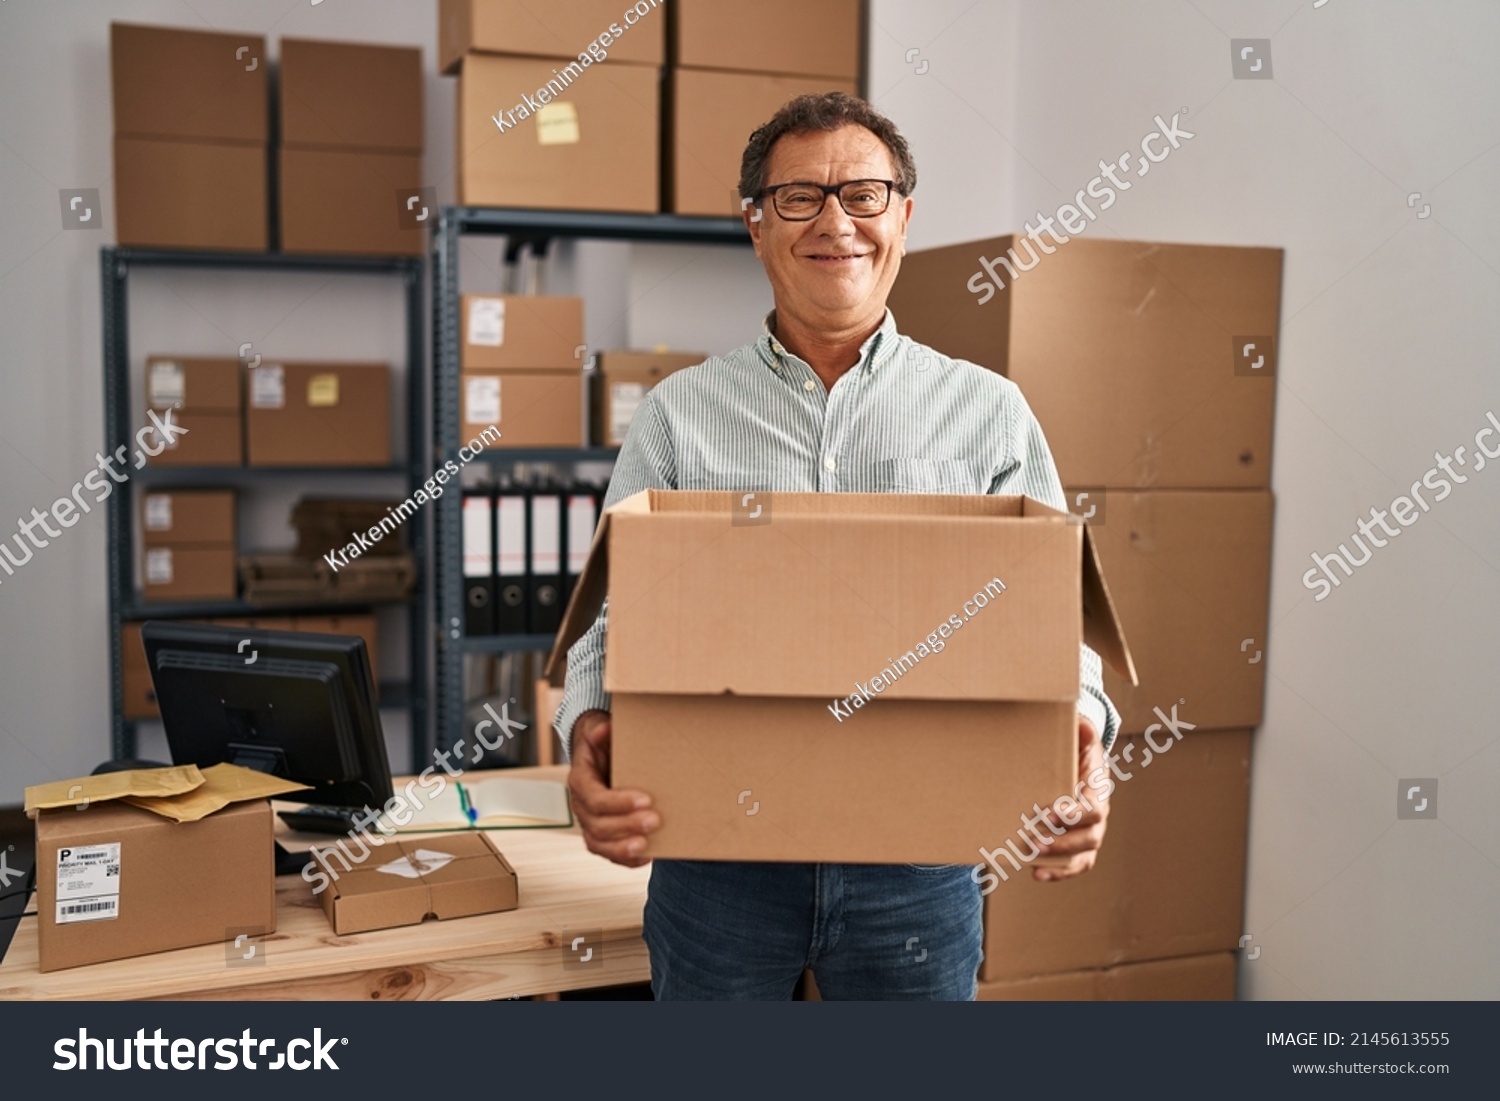 Senior man working at small business ecommerce holding carboard bx smiling with a happy and cool smile on face. showing teeth.  #2145613555